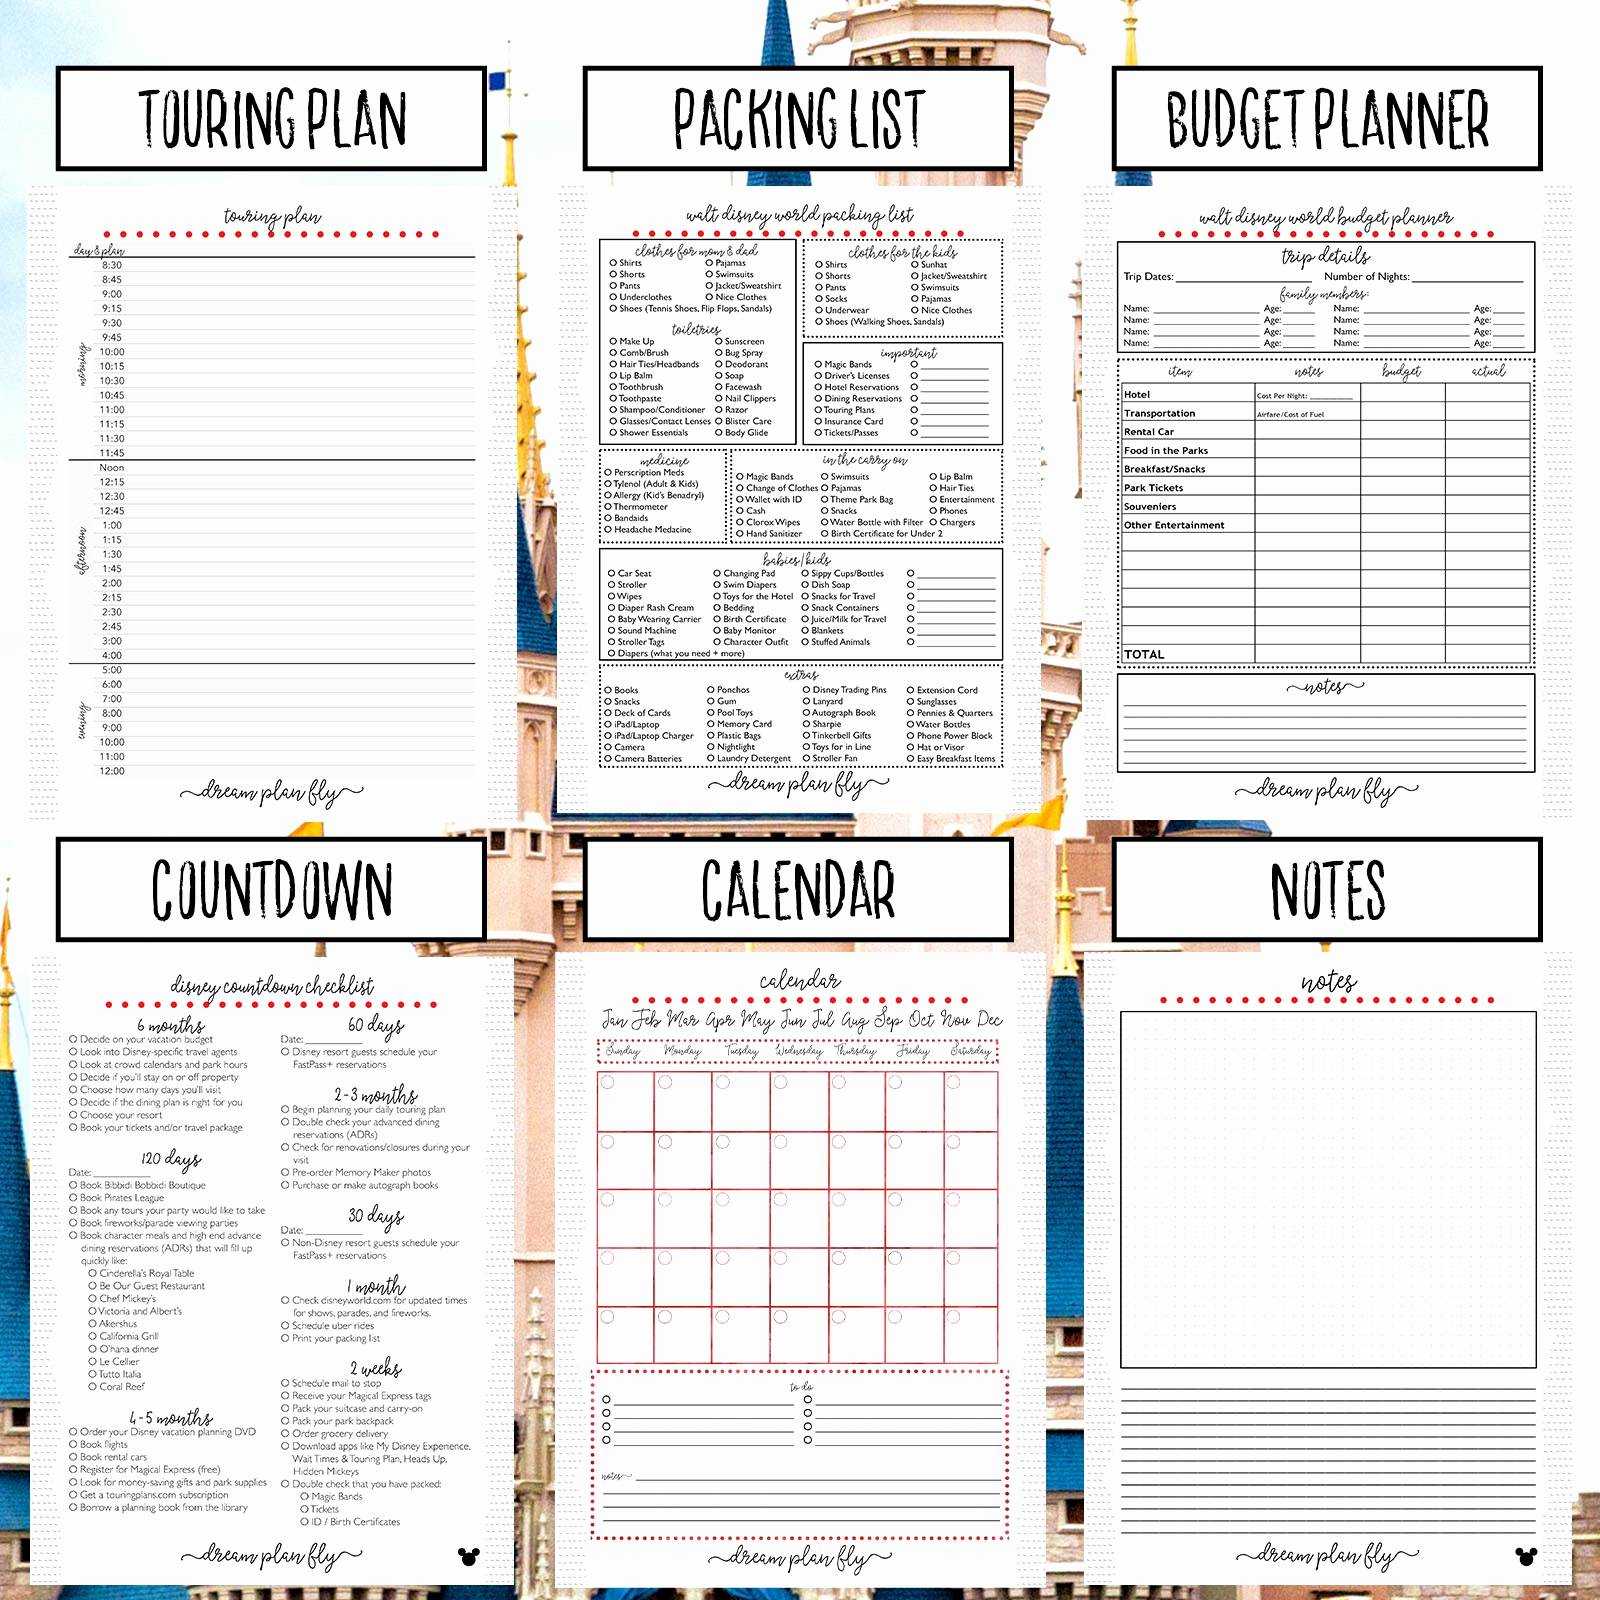 Schedule Worksheet Templates as Well as Editorial Calendar Template Excel New Spreadsheet Type Auto